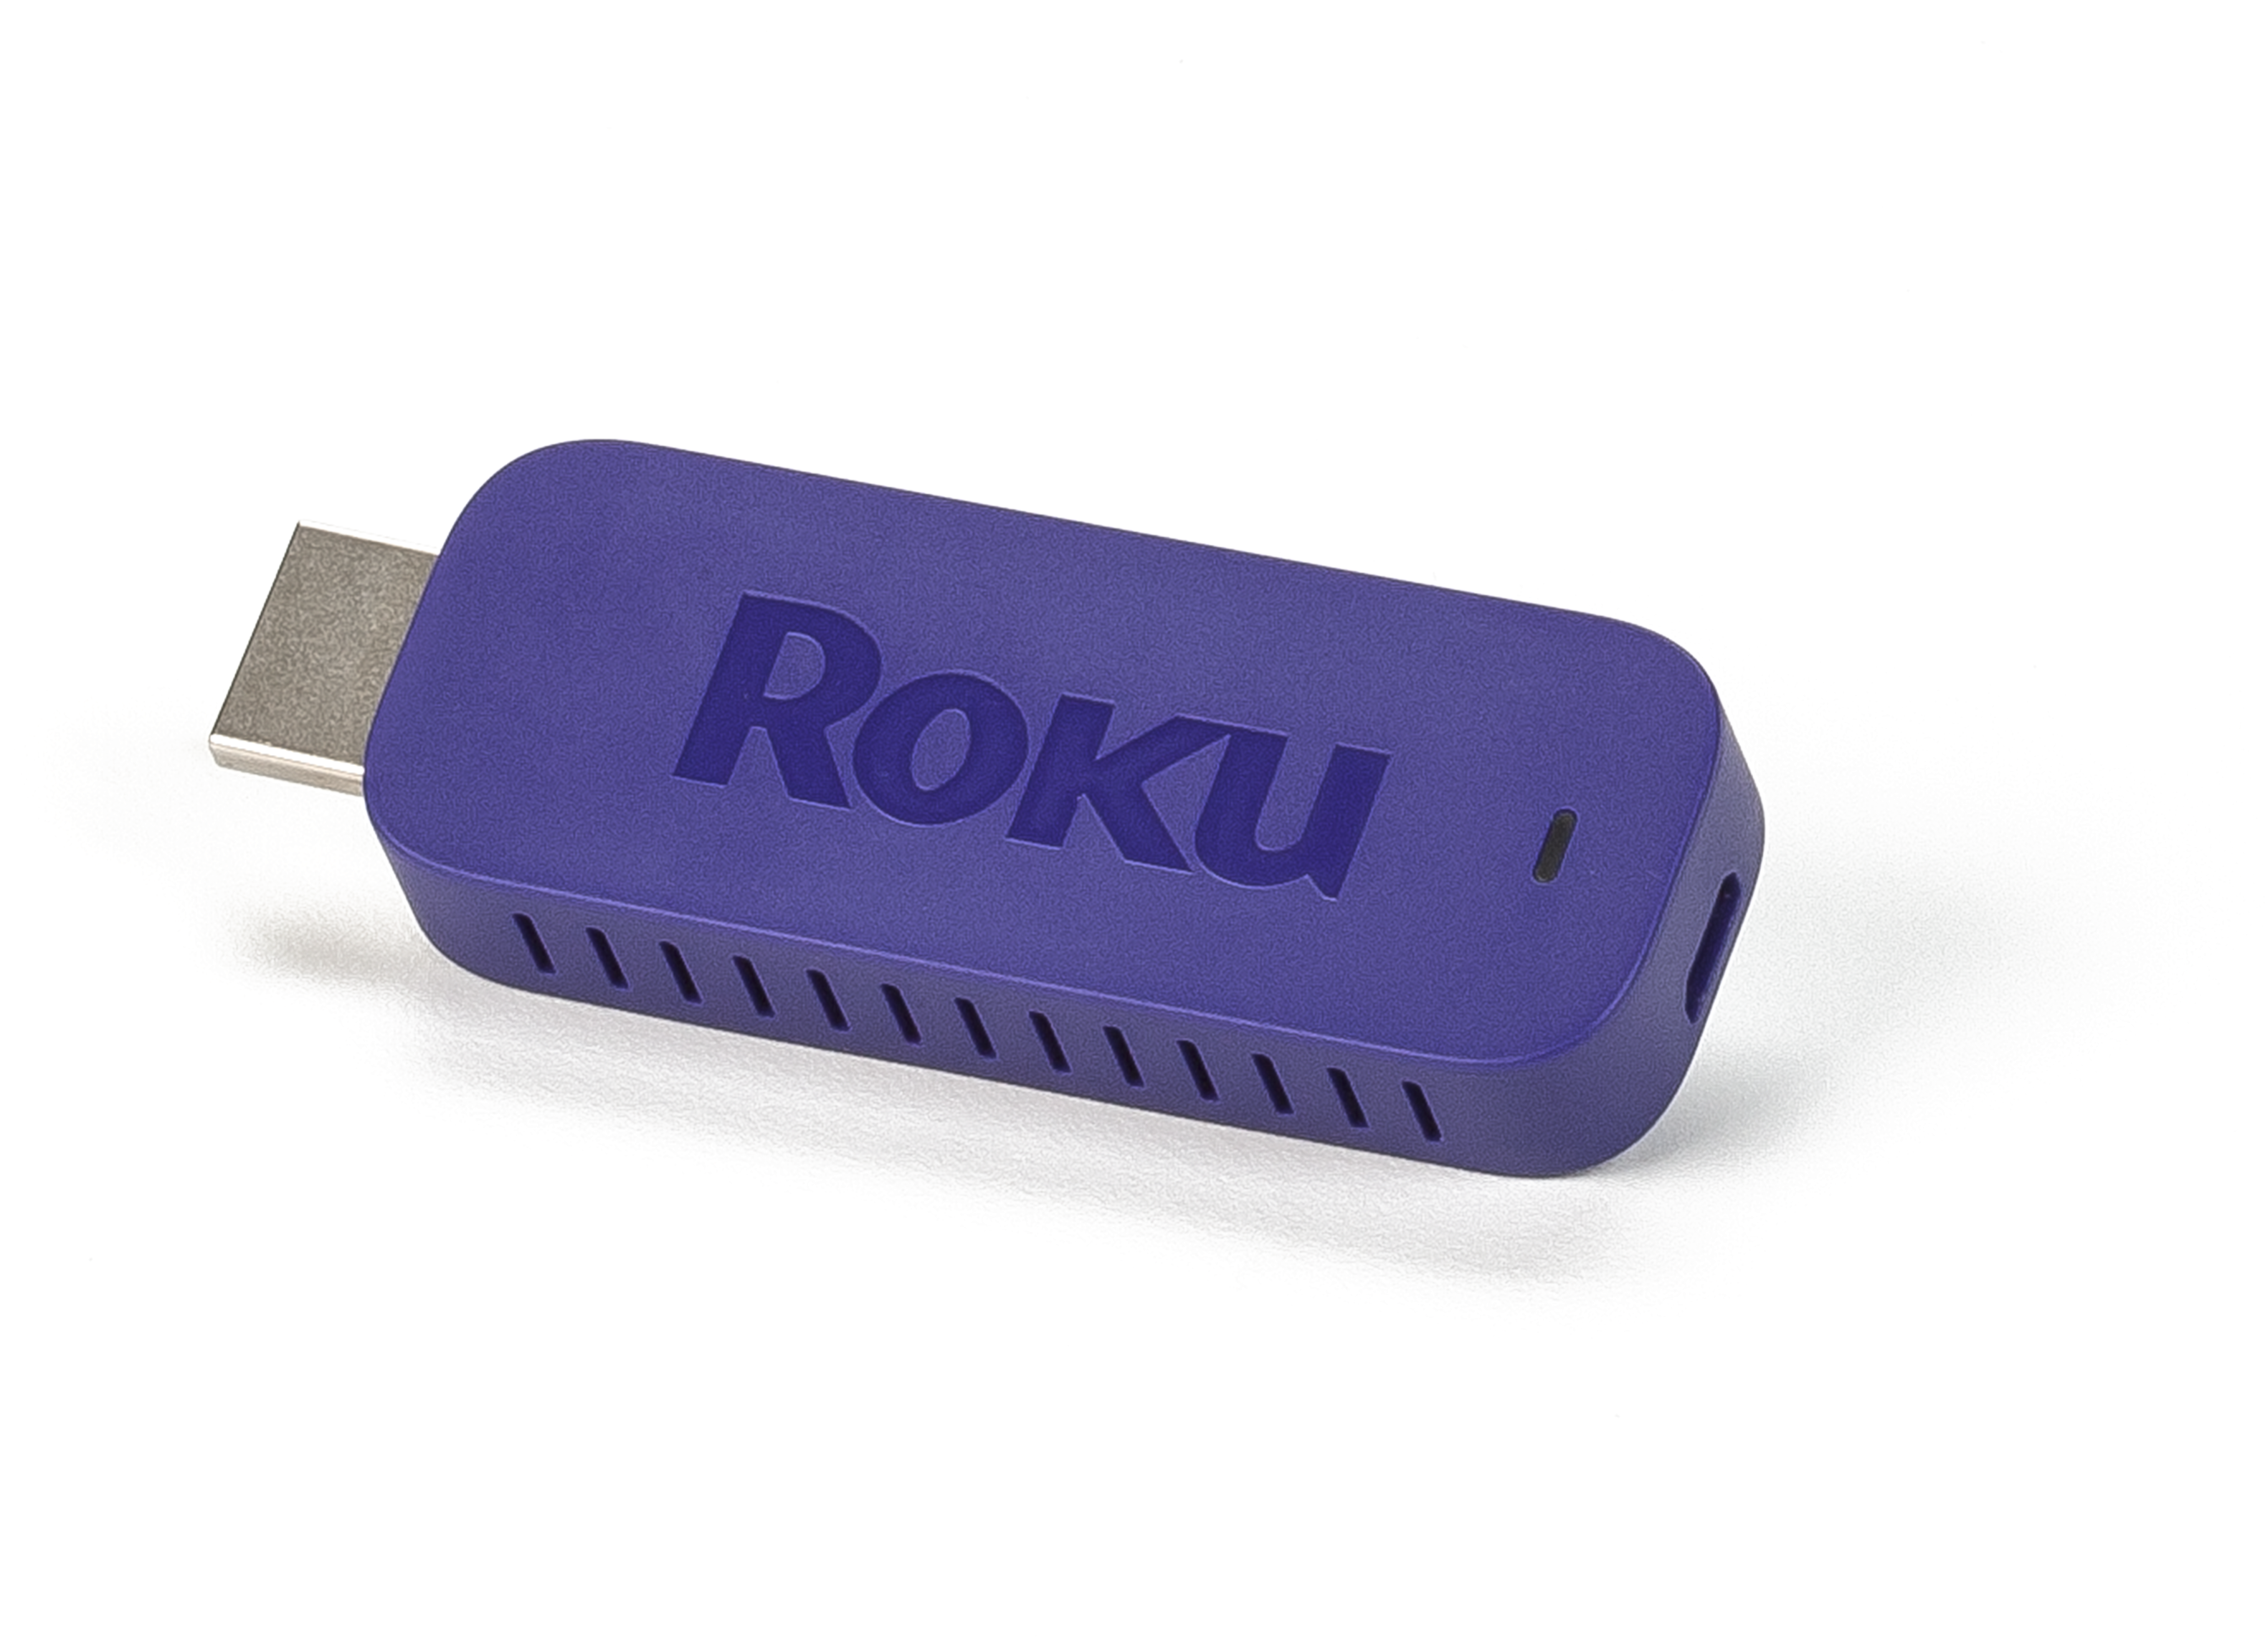 https://crdms.images.consumerreports.org/prod/products/cr/models/263028-streamingmediaplayers-roku-streamingstickhdmiversion.png